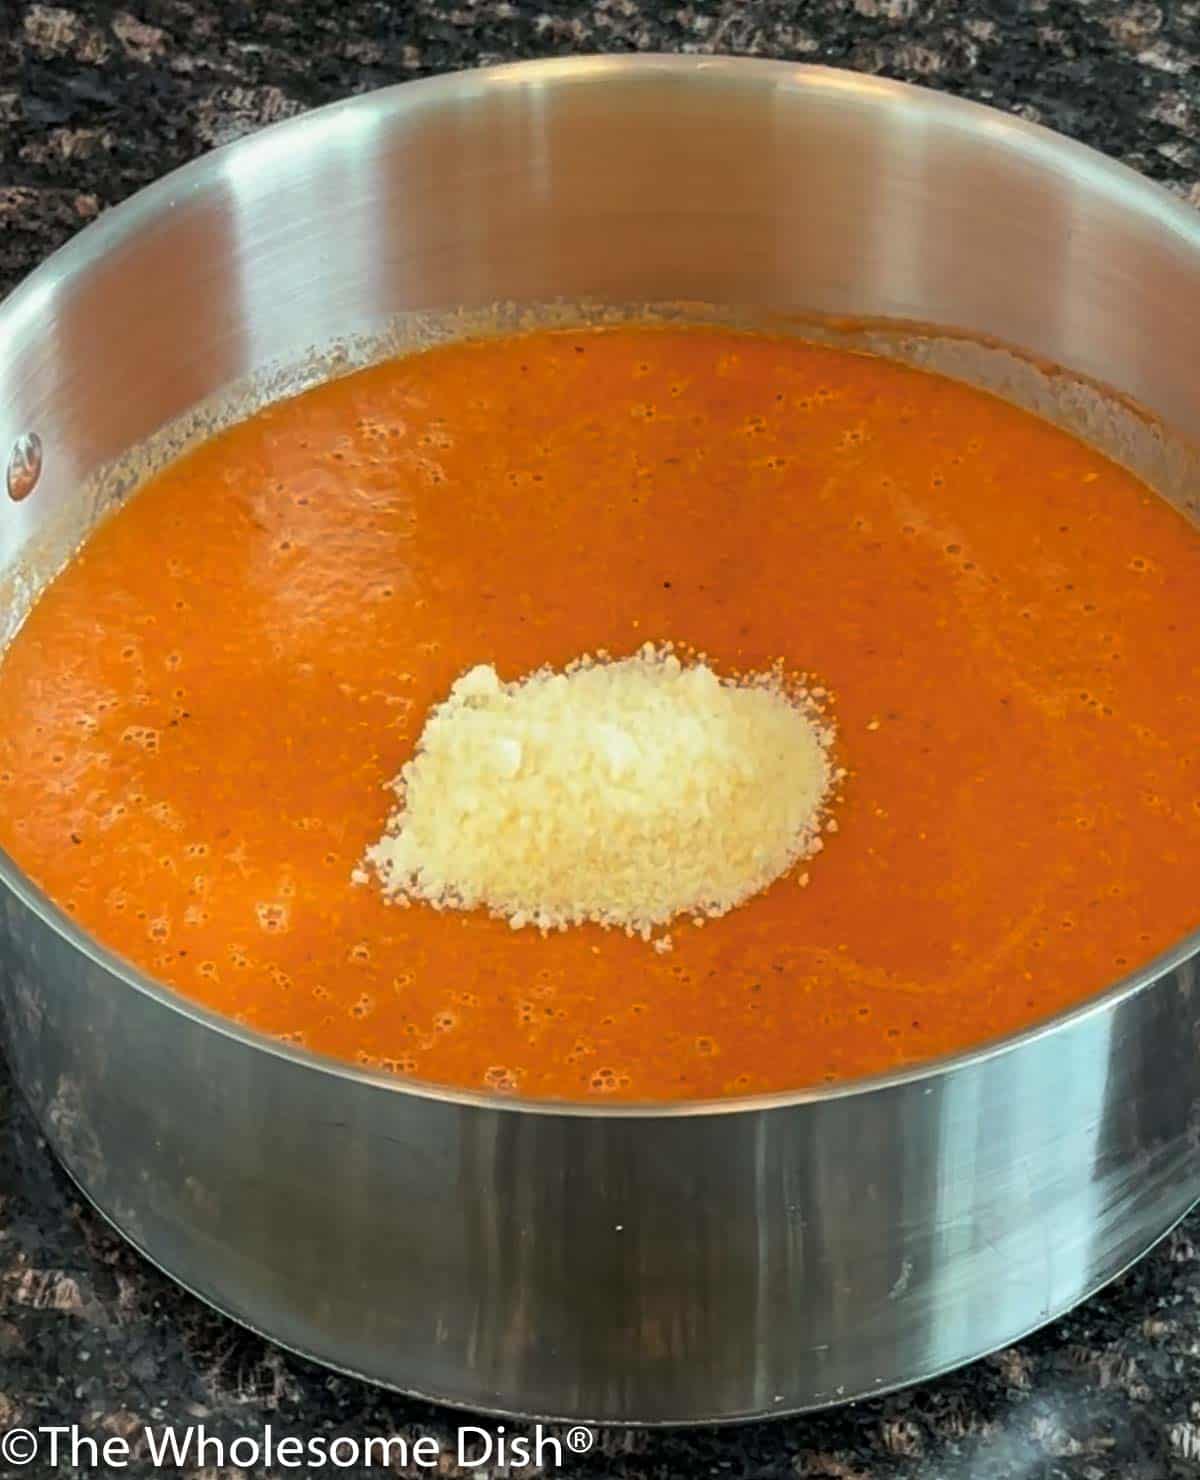 Adding parmesan cheese to the tomato soup.